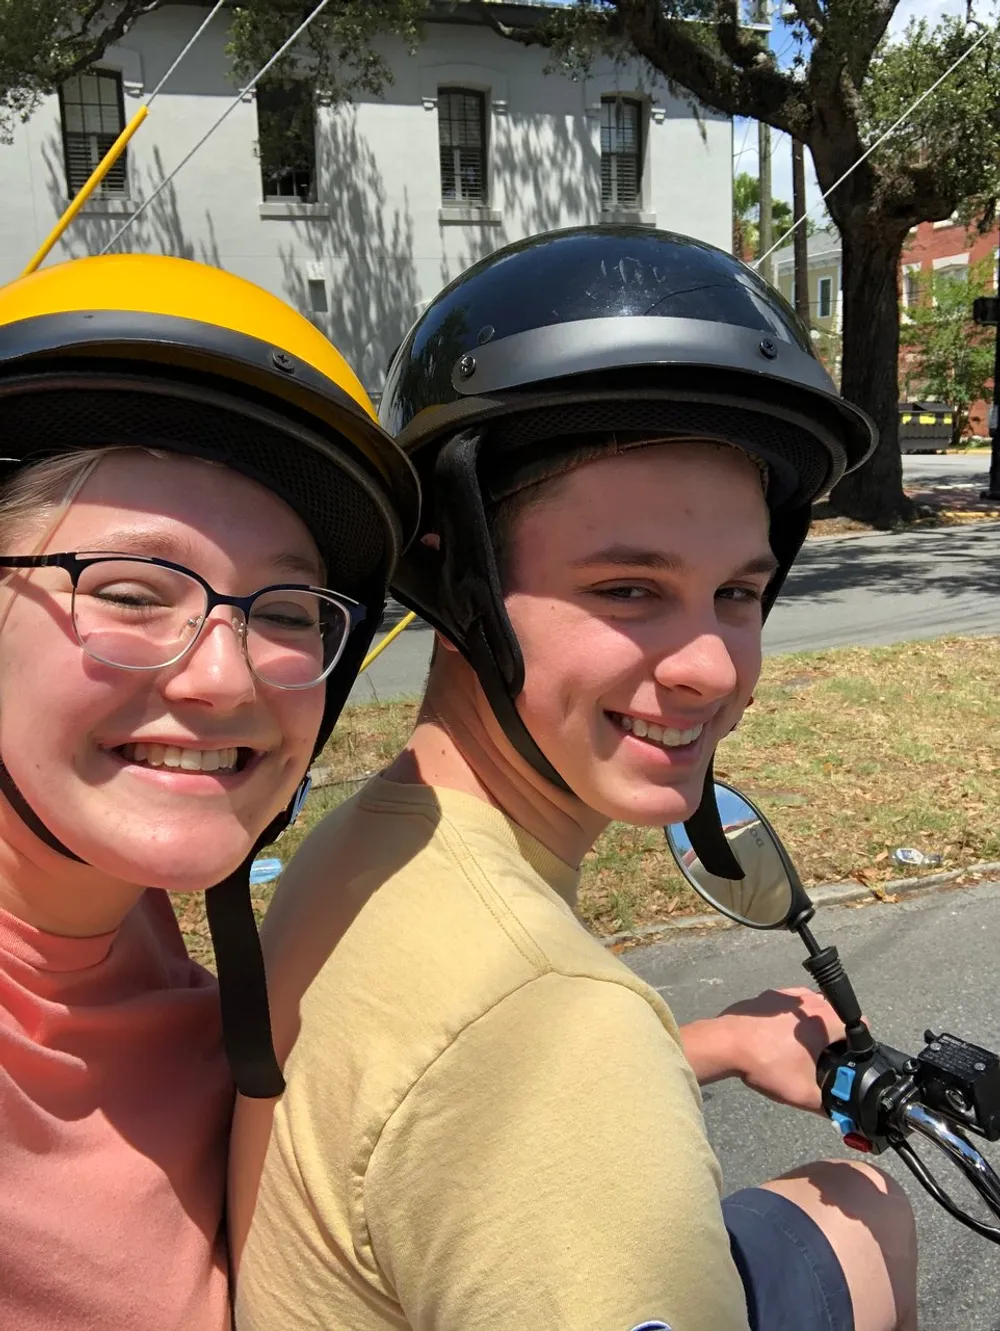 Two smiling people wearing helmets are taking a selfie likely on a sunny day possibly before or after a ride on a motorcycle or scooter